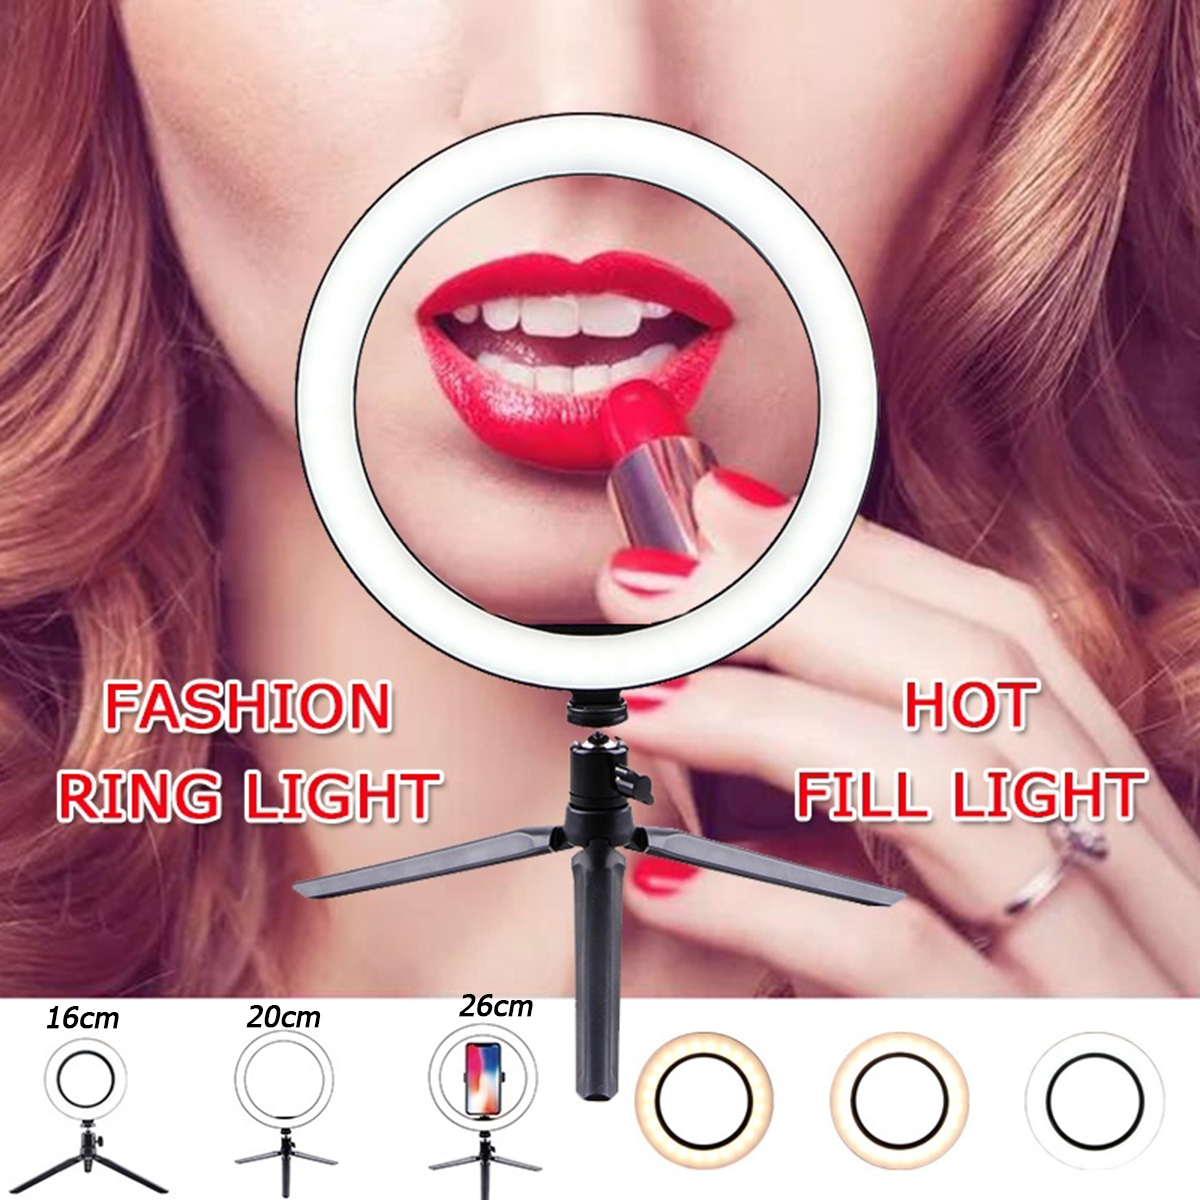 Portable-Ring-Light-LED-Makeup-Ring-Lamp-USB-Selfie-Ring-Lamp-Phone-Holder-Tripod-Stand-Photography--1579954-3